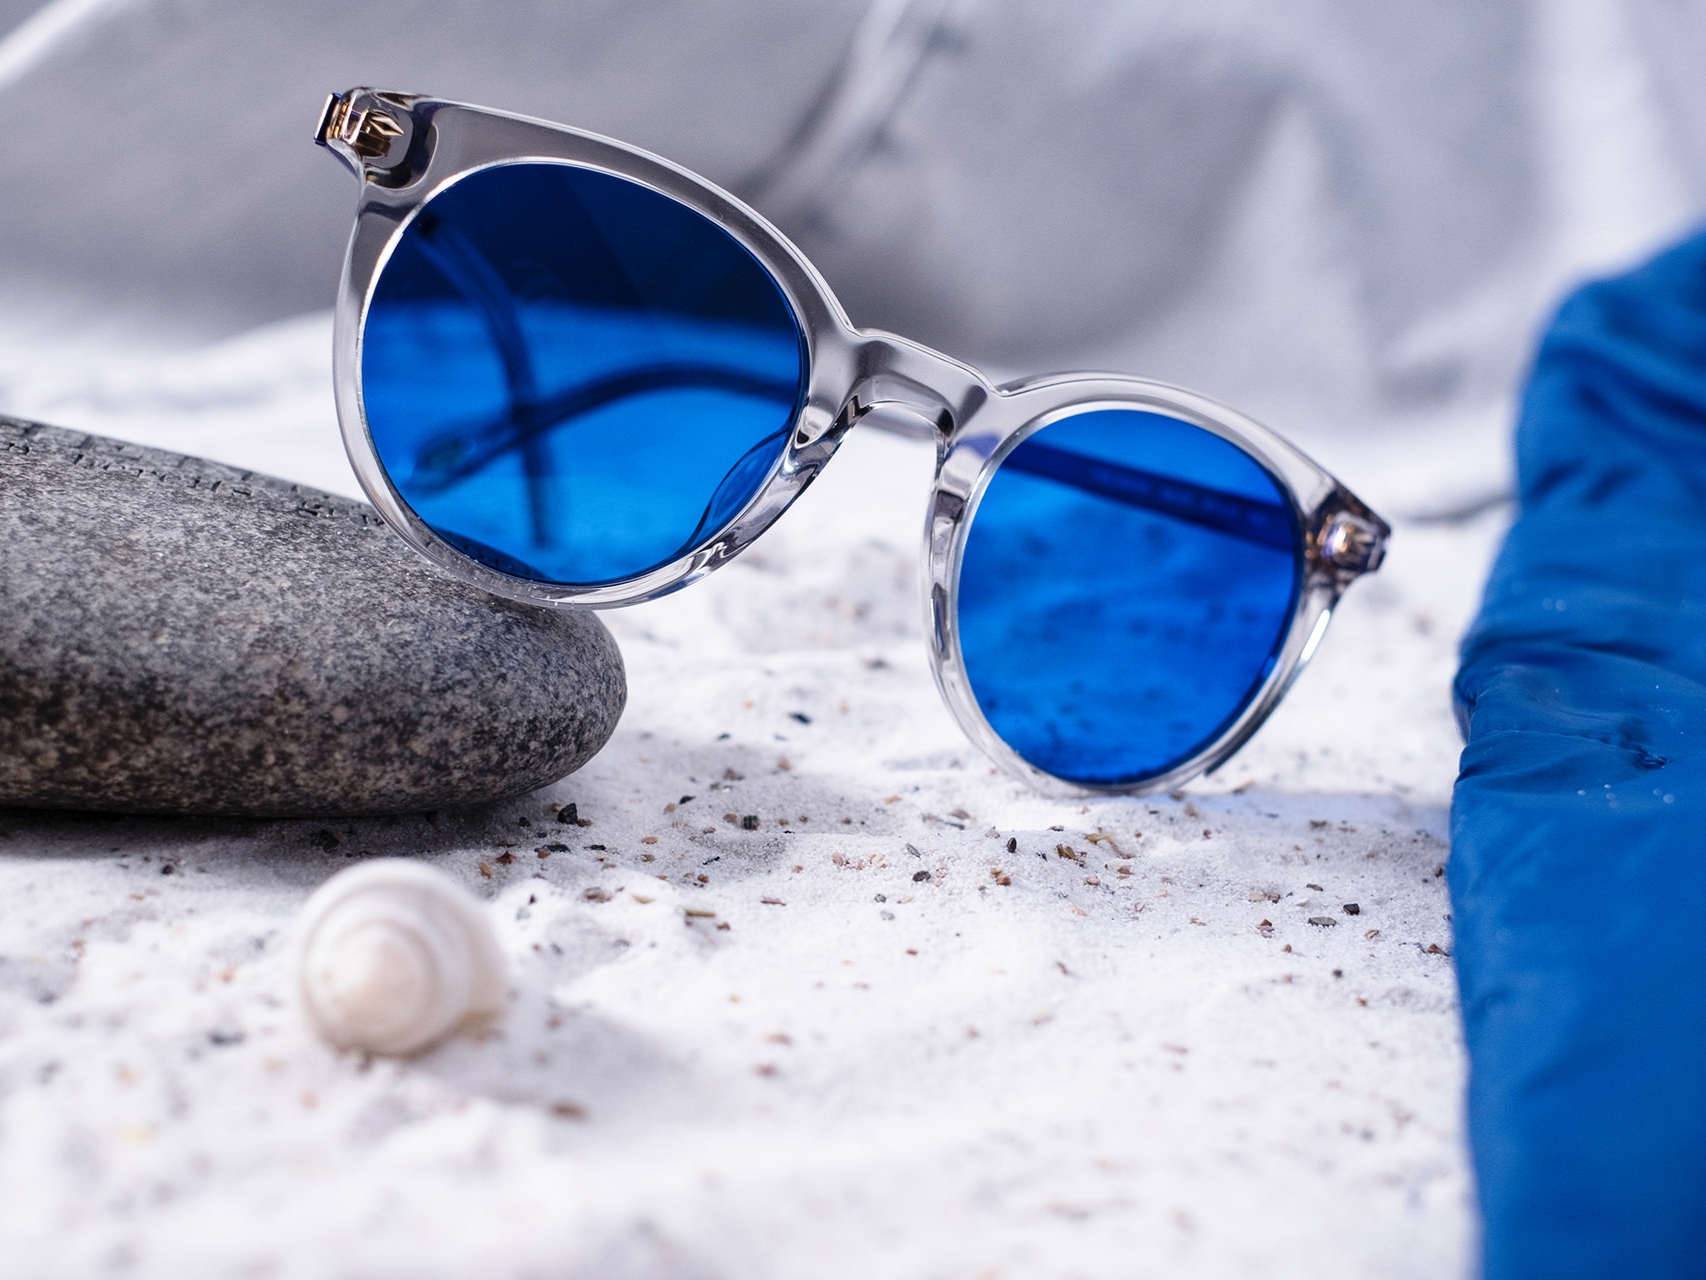 Picture of a pair of sunglasses with blue tint half laid on a stone